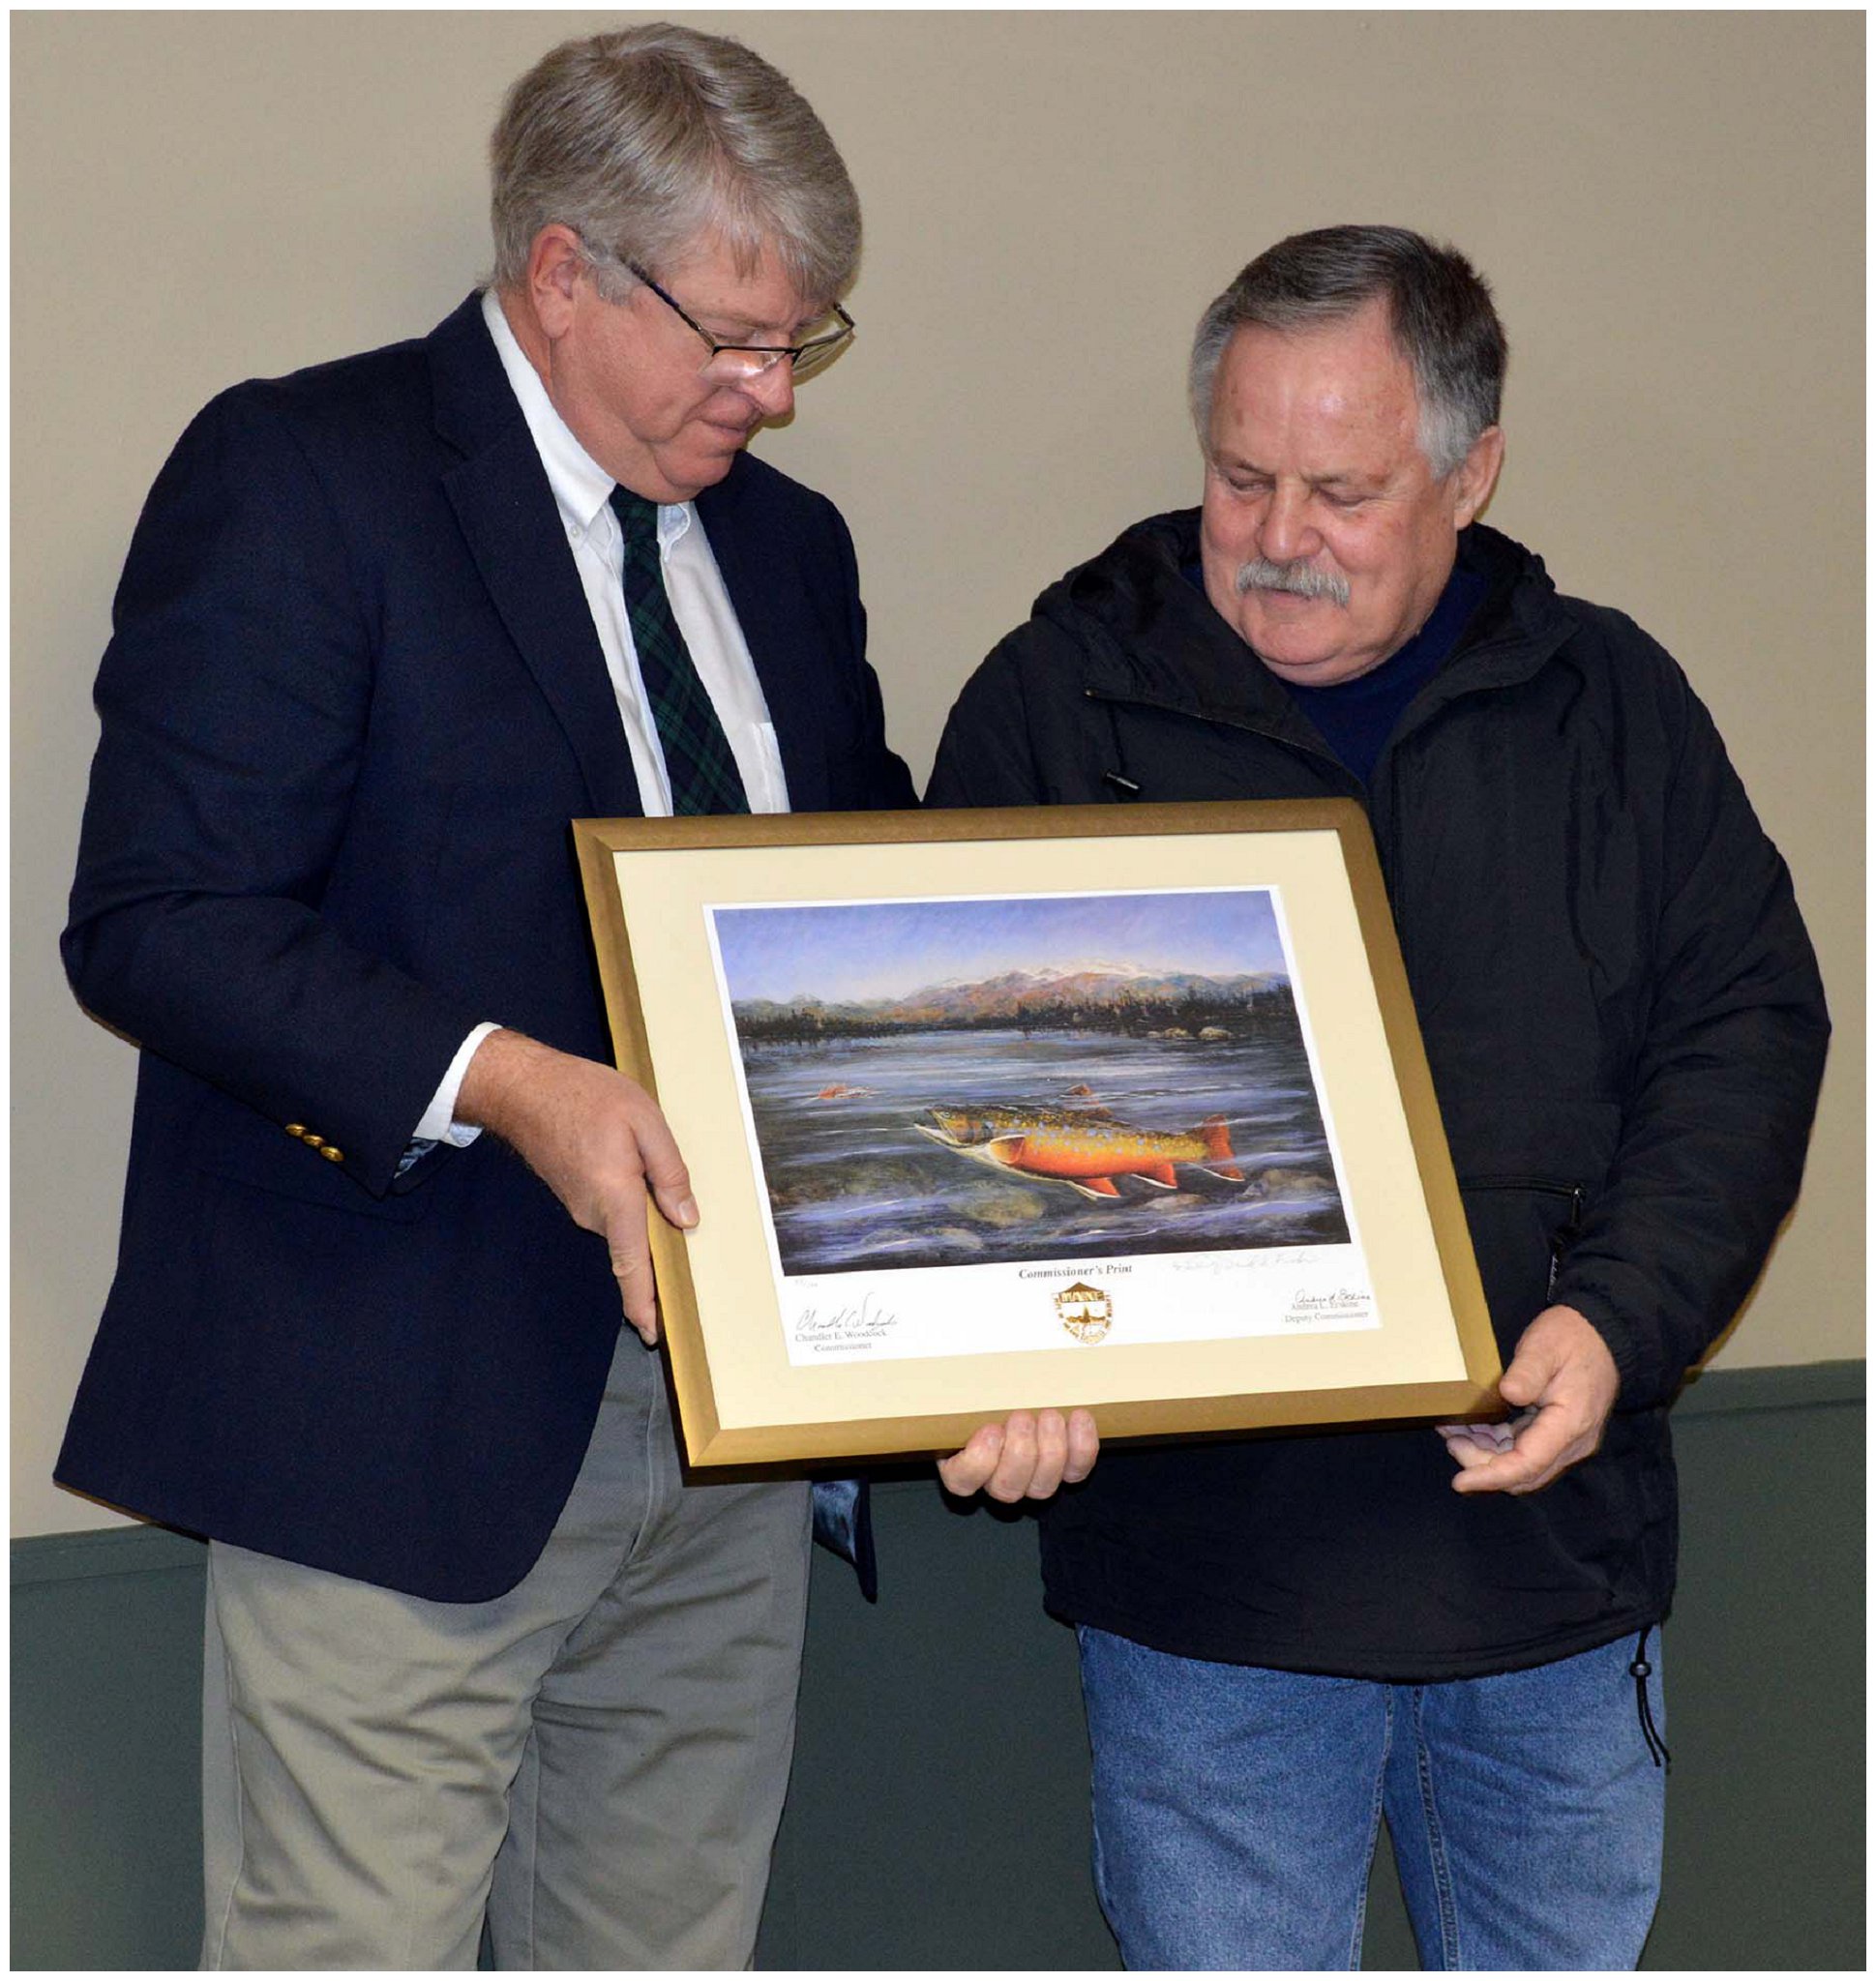 Commissioner Woodcock (left) presents a Commissioner's Print to Butch Vickerson (right)